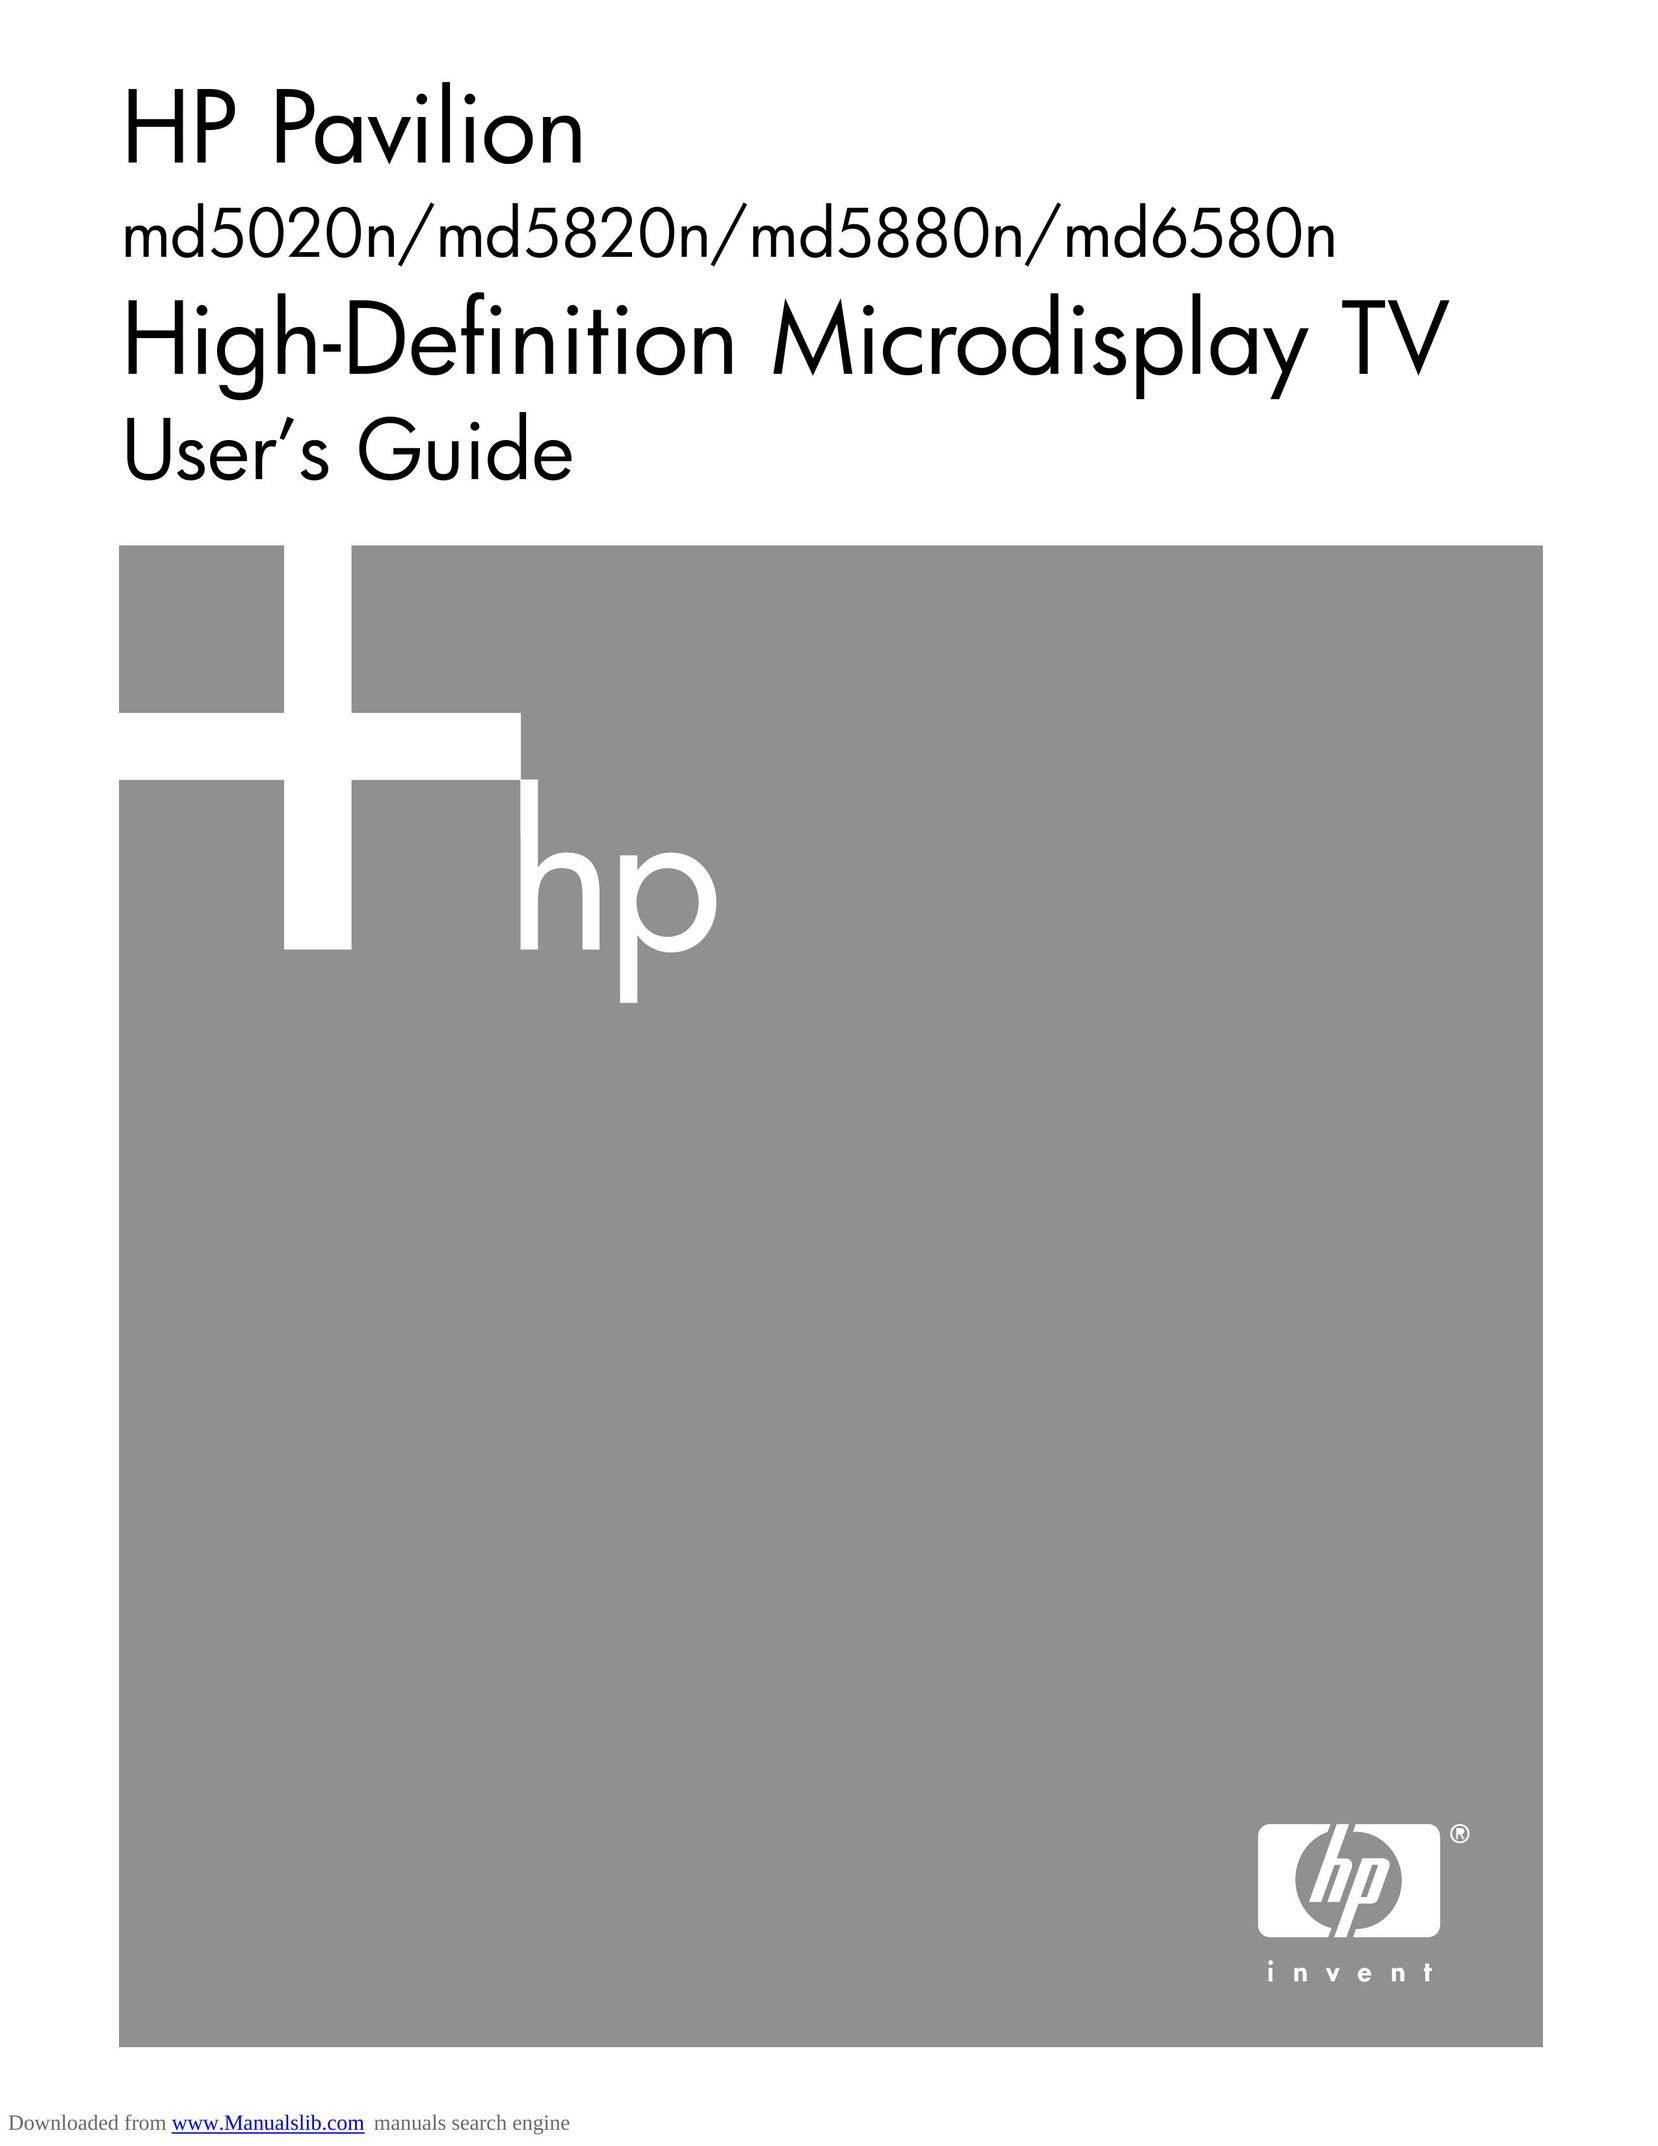 HP (Hewlett-Packard) MD6580N Projection Television User Manual